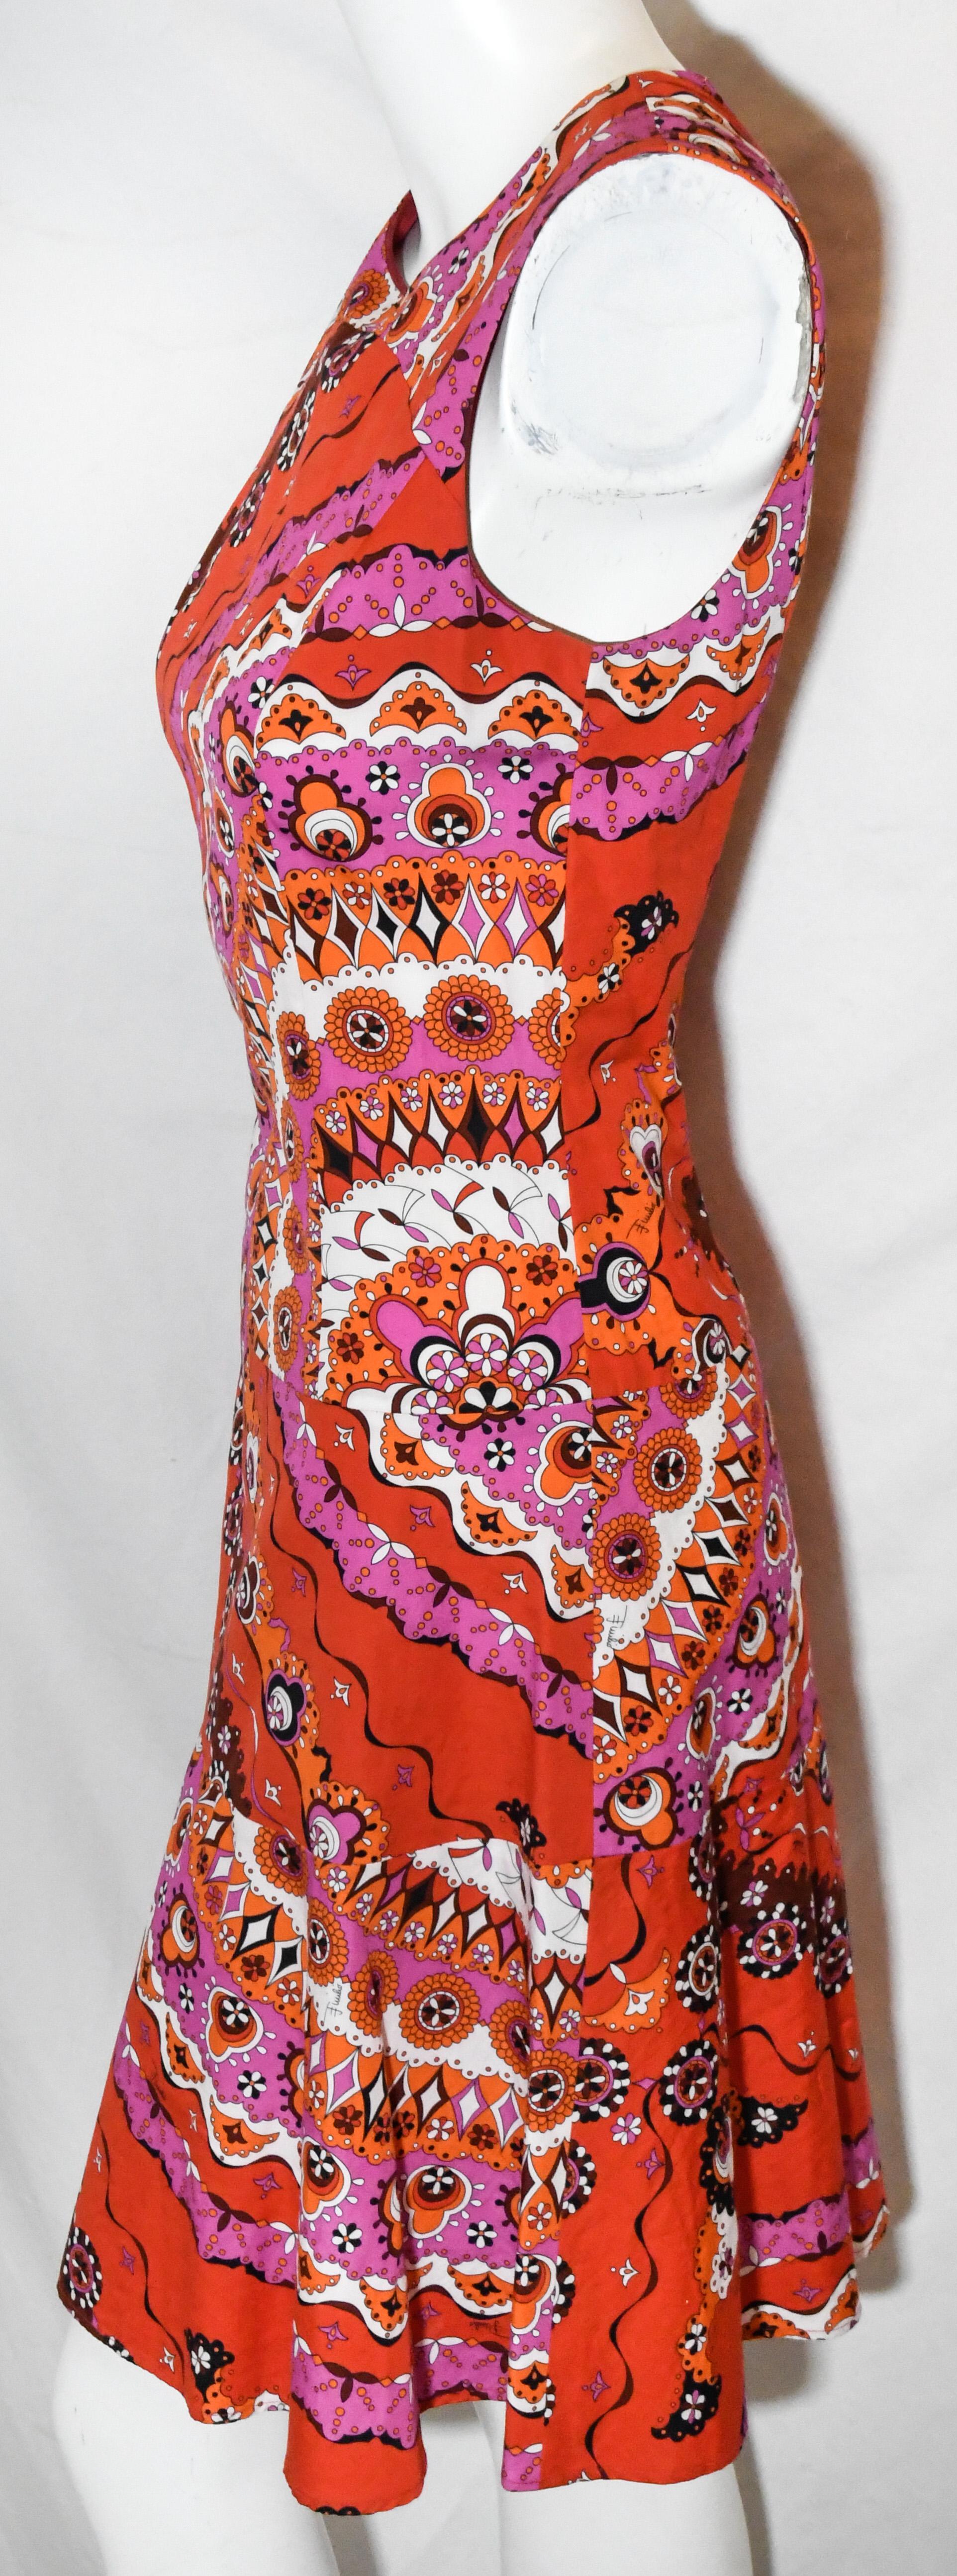 Emilio Pucci vibrant red print round neck dress includes a long gold tone zipper at back.  This dress is tapered to the body down to the hips then dress opens up to the hem.  This dress is not lined.  Dress is in excellent condition.  Made in Italy